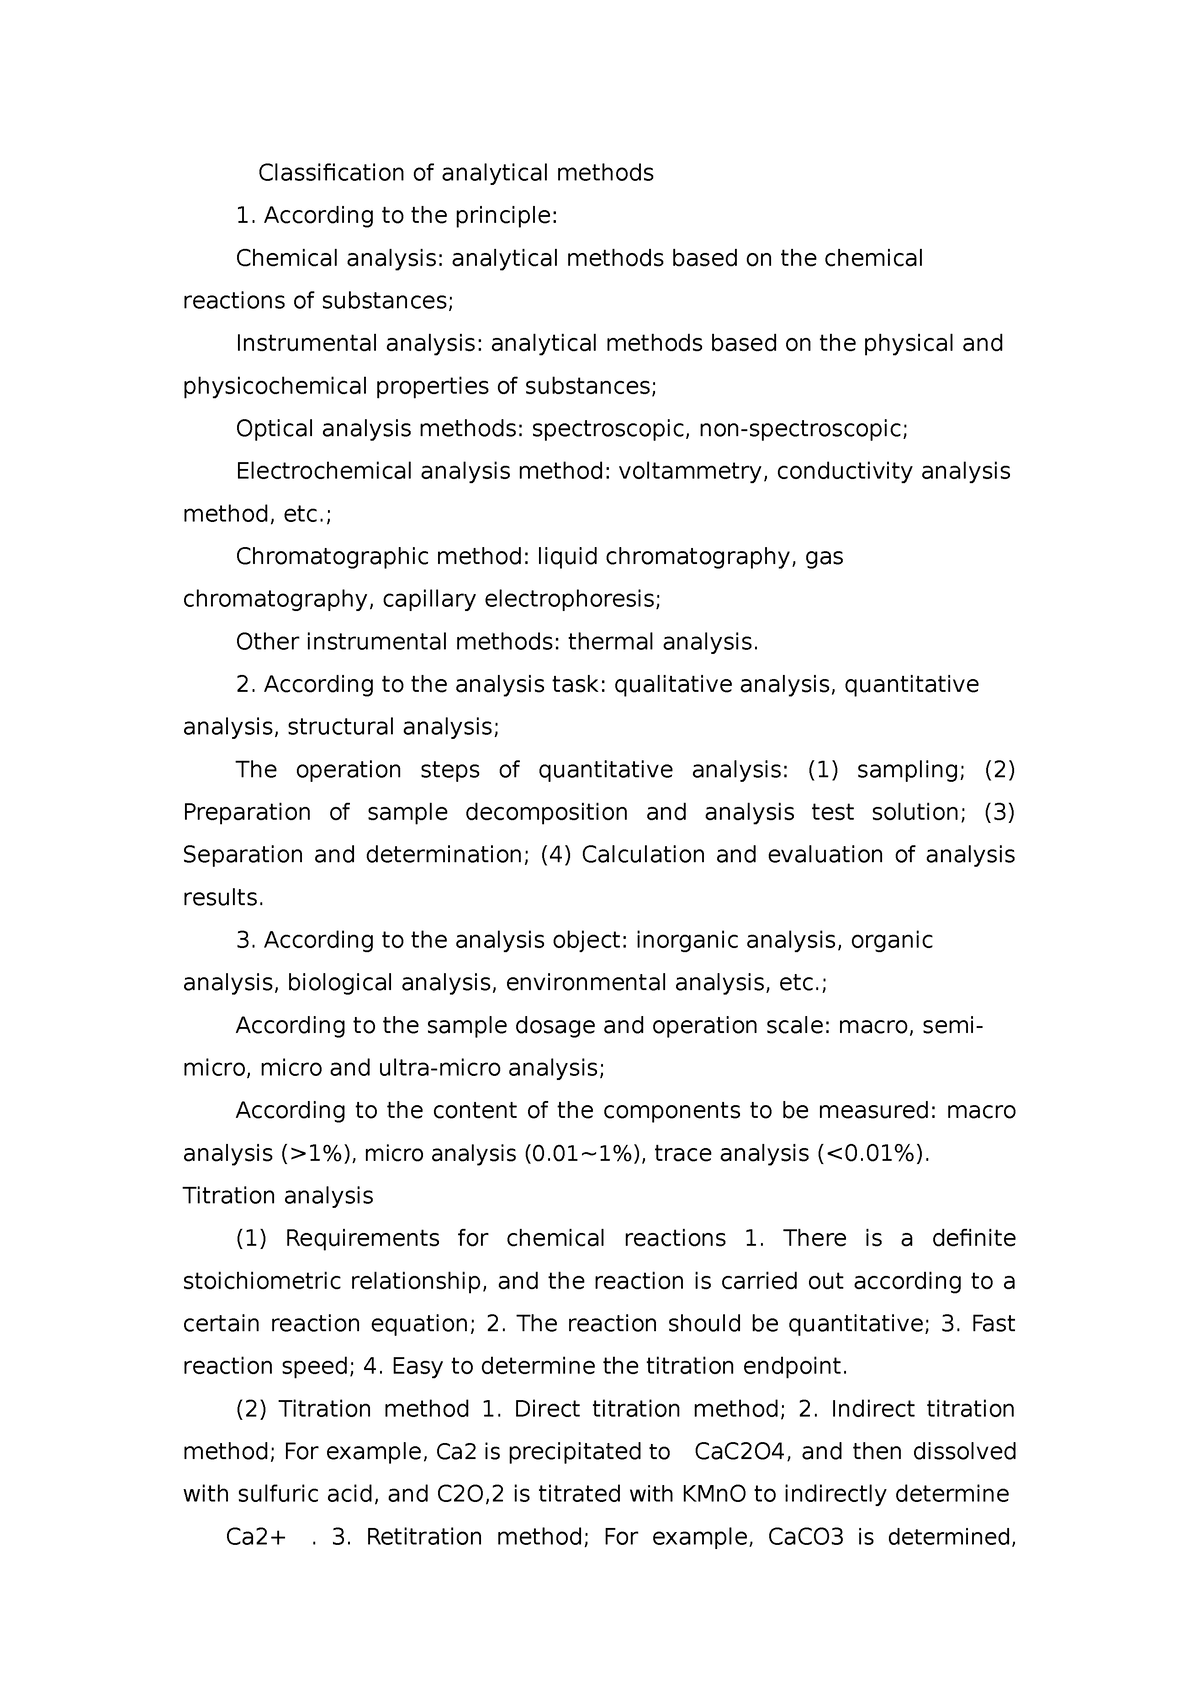 essay about analytical methods